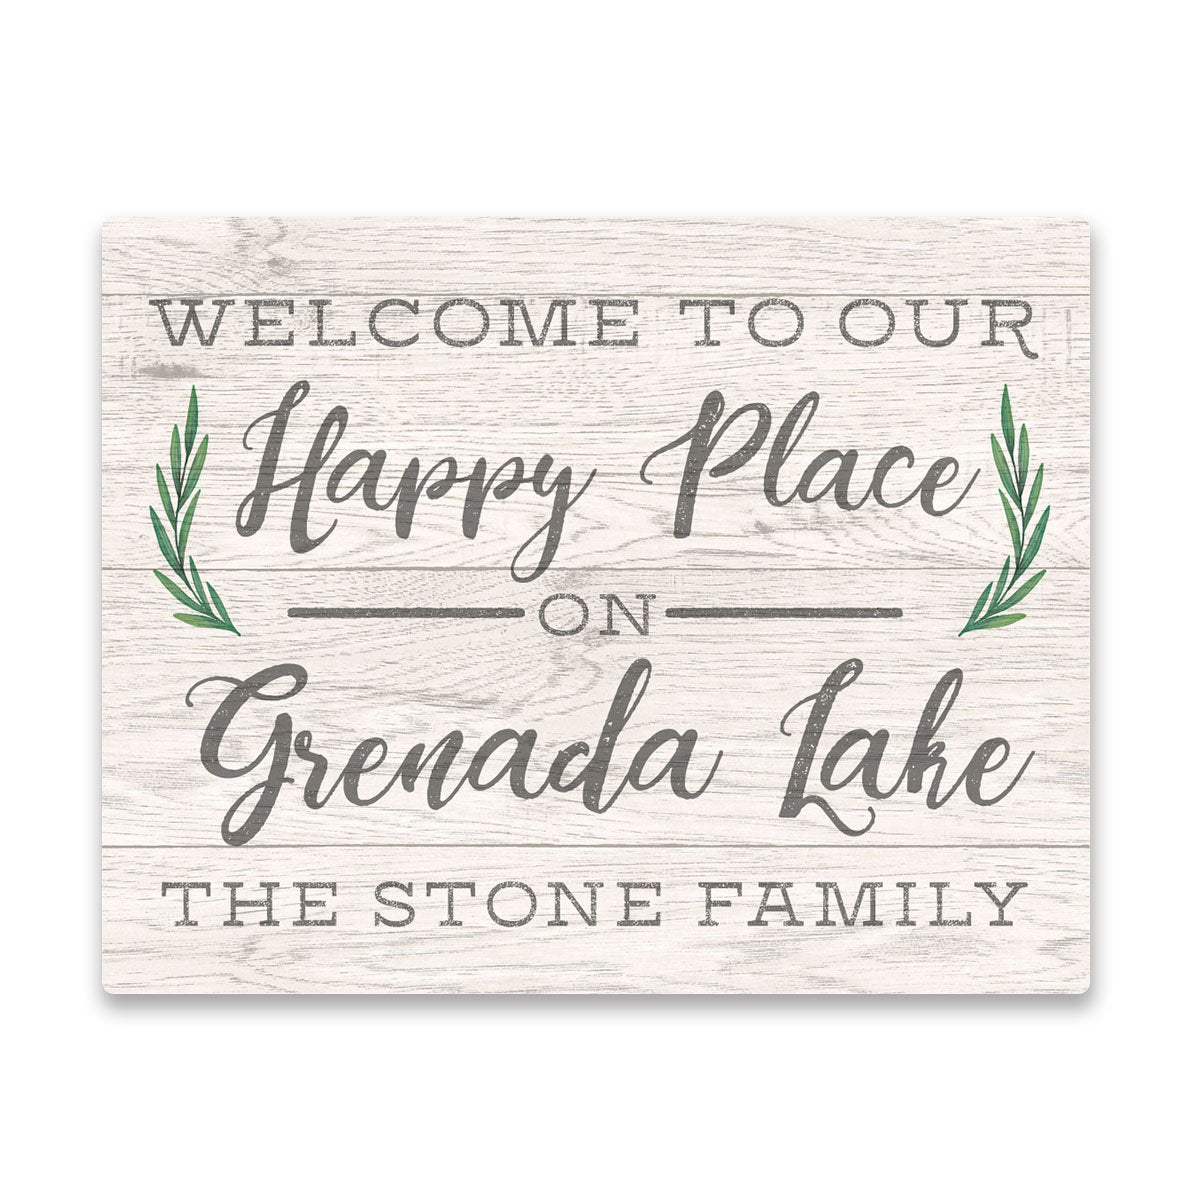 Personalized Welcome to Our Happy Place on Grenada Lake Wall Art